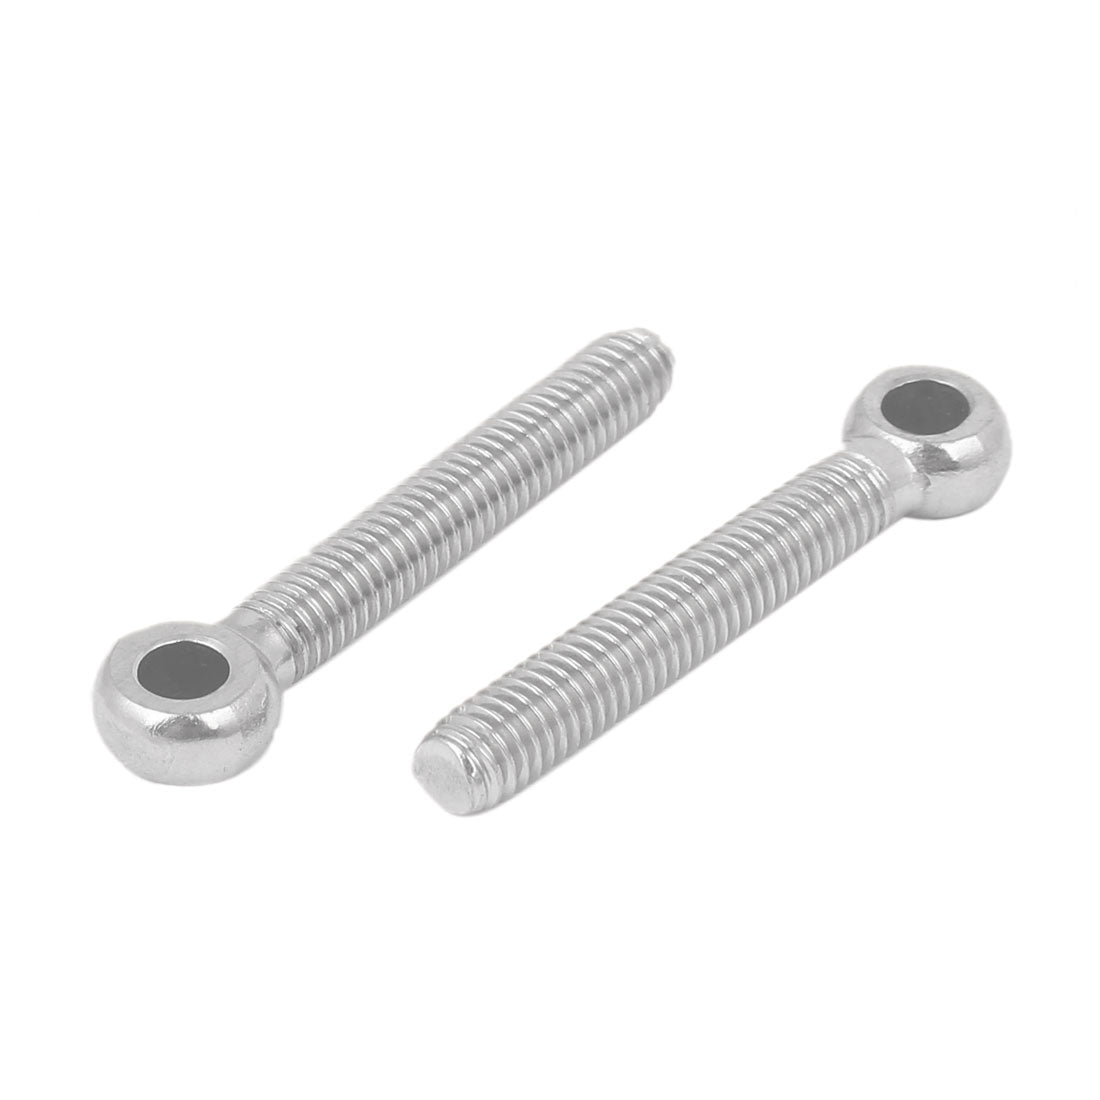 uxcell Uxcell M6 x 40mm 304 Stainless Steel Machine Shoulder Lift Eye Bolt Rigging 30pcs